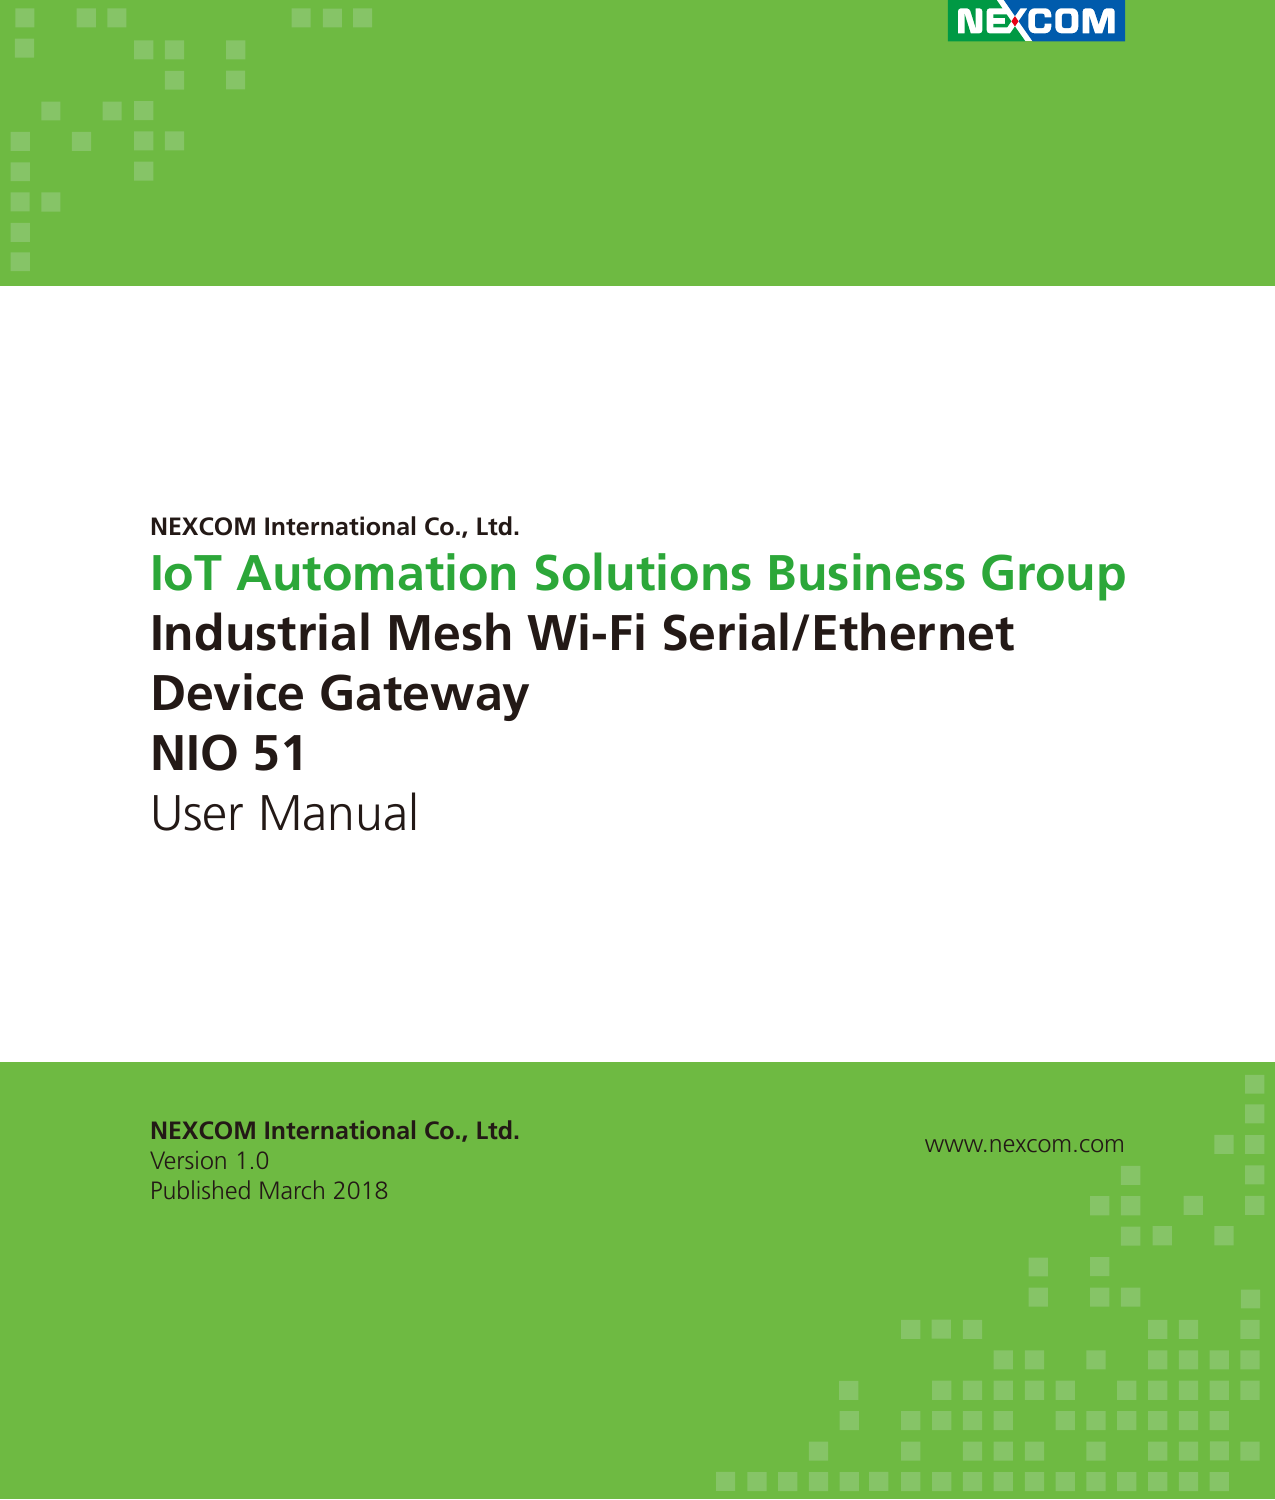 NEXCOM International Co., Ltd.Version 1.0Published March 2018www.nexcom.comNEXCOM International Co., Ltd.IoT Automation Solutions Business GroupIndustrial Mesh Wi-Fi Serial/Ethernet     Device GatewayNIO 51User Manual